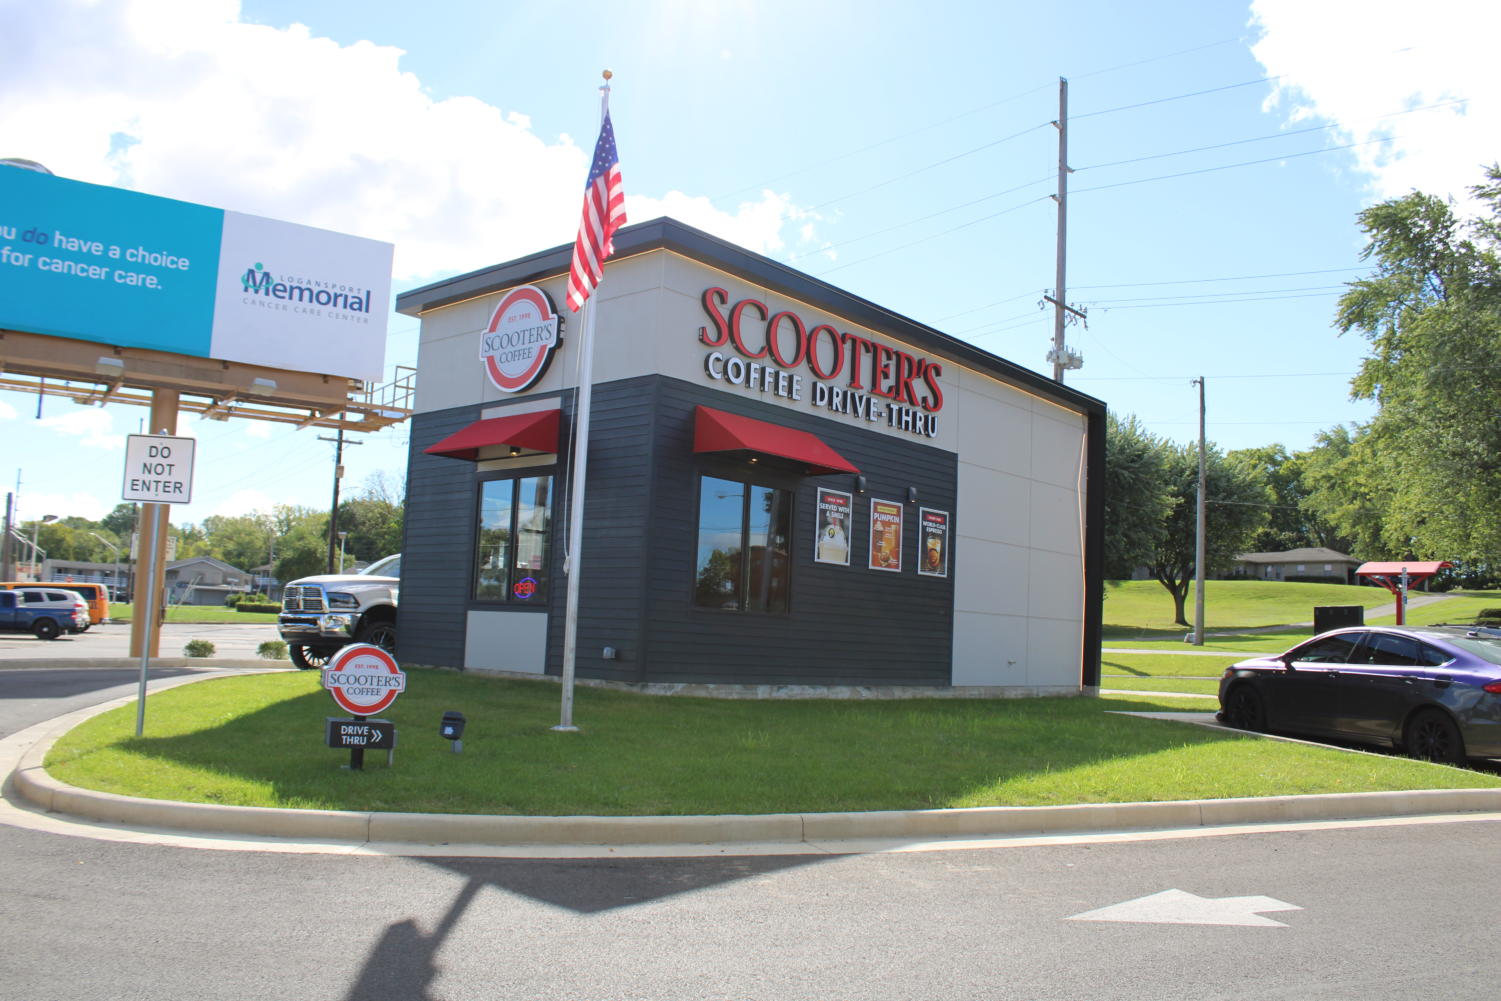 Scooters is at 3225 East Market Street at the former location of Maxx Tan.